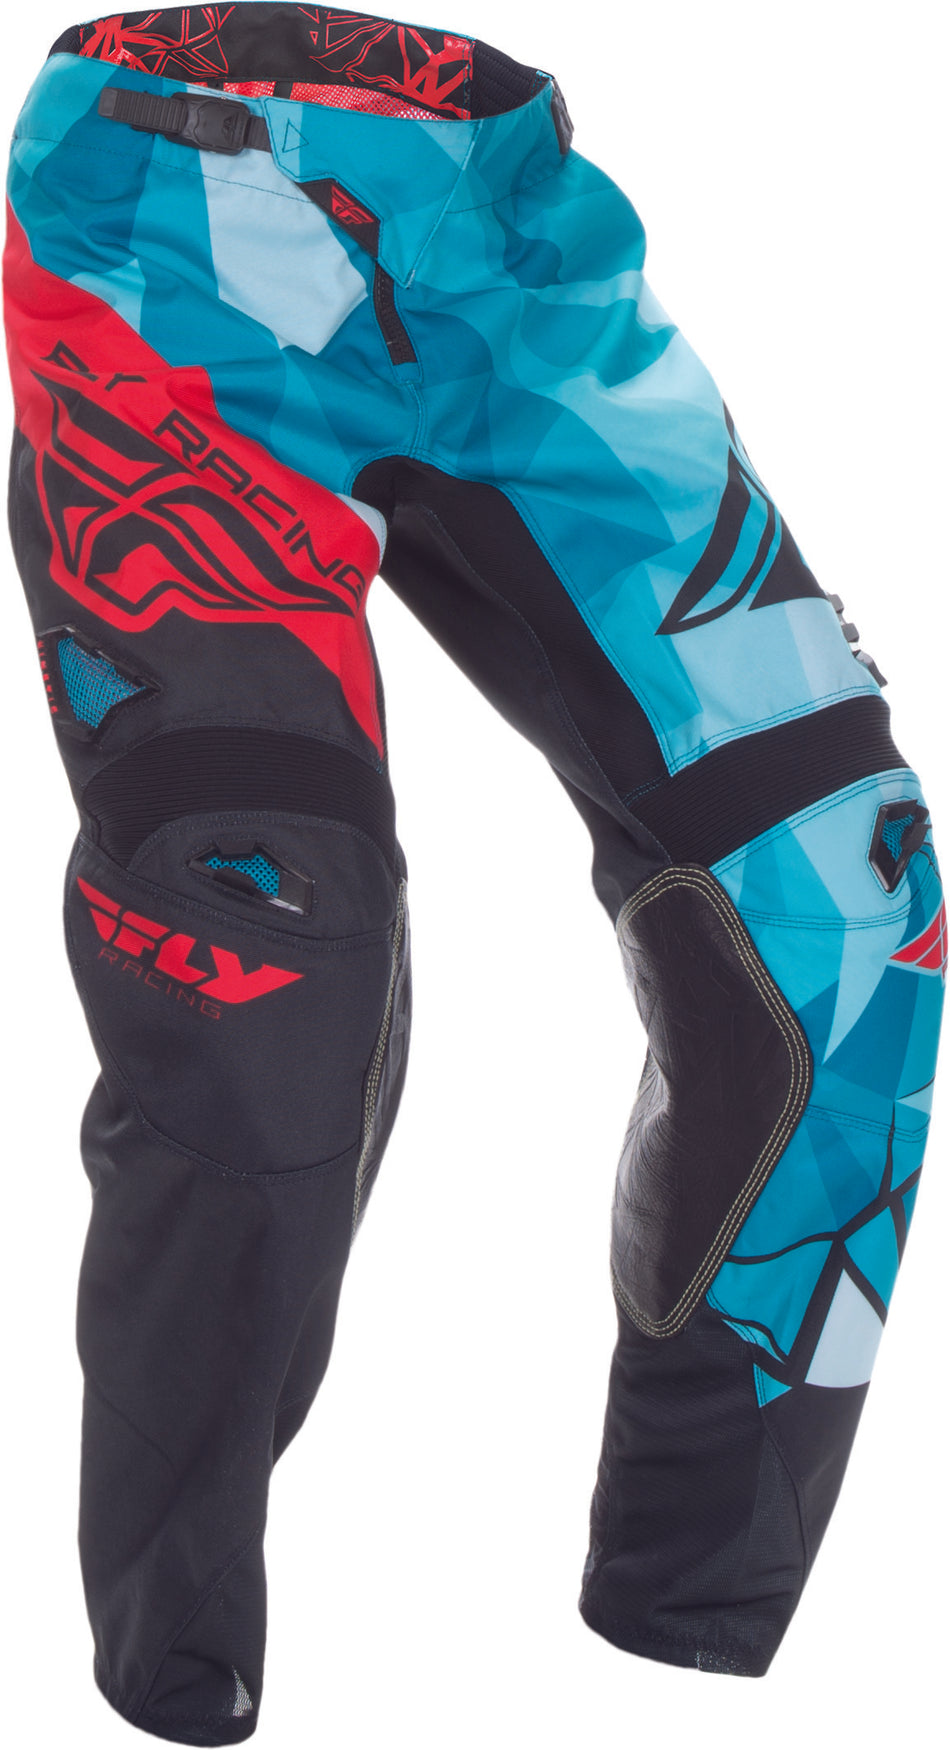 FLY RACING Kinetic Crux Pant Teal/Red Sz 38 370-53938